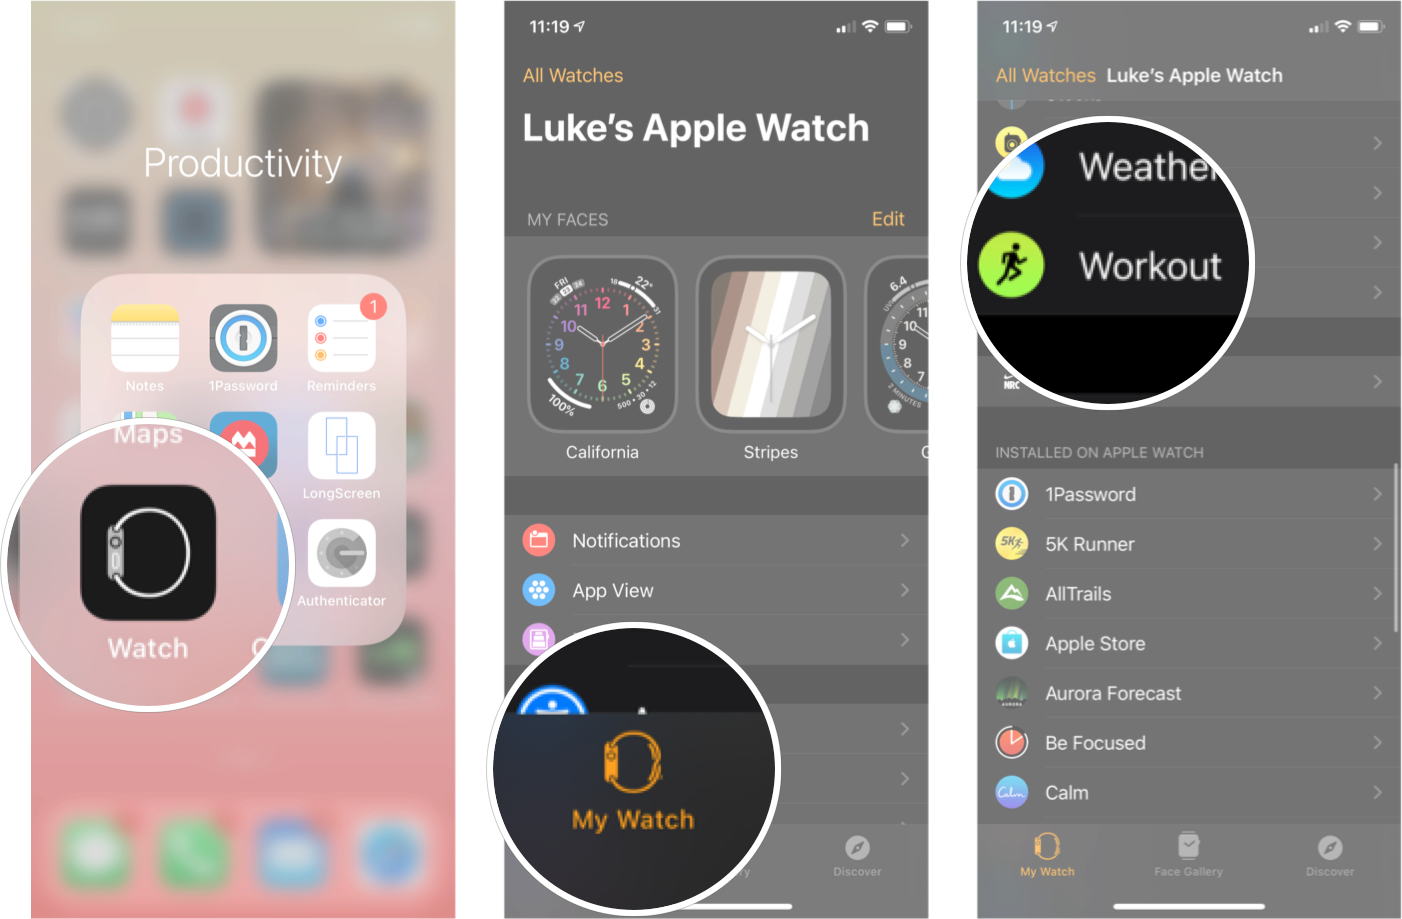 Adding A Workout Playlist On Apple Watch: Launch the settings app from the Hoe screen on your iPhone, tap my watch, and then tap workout. 